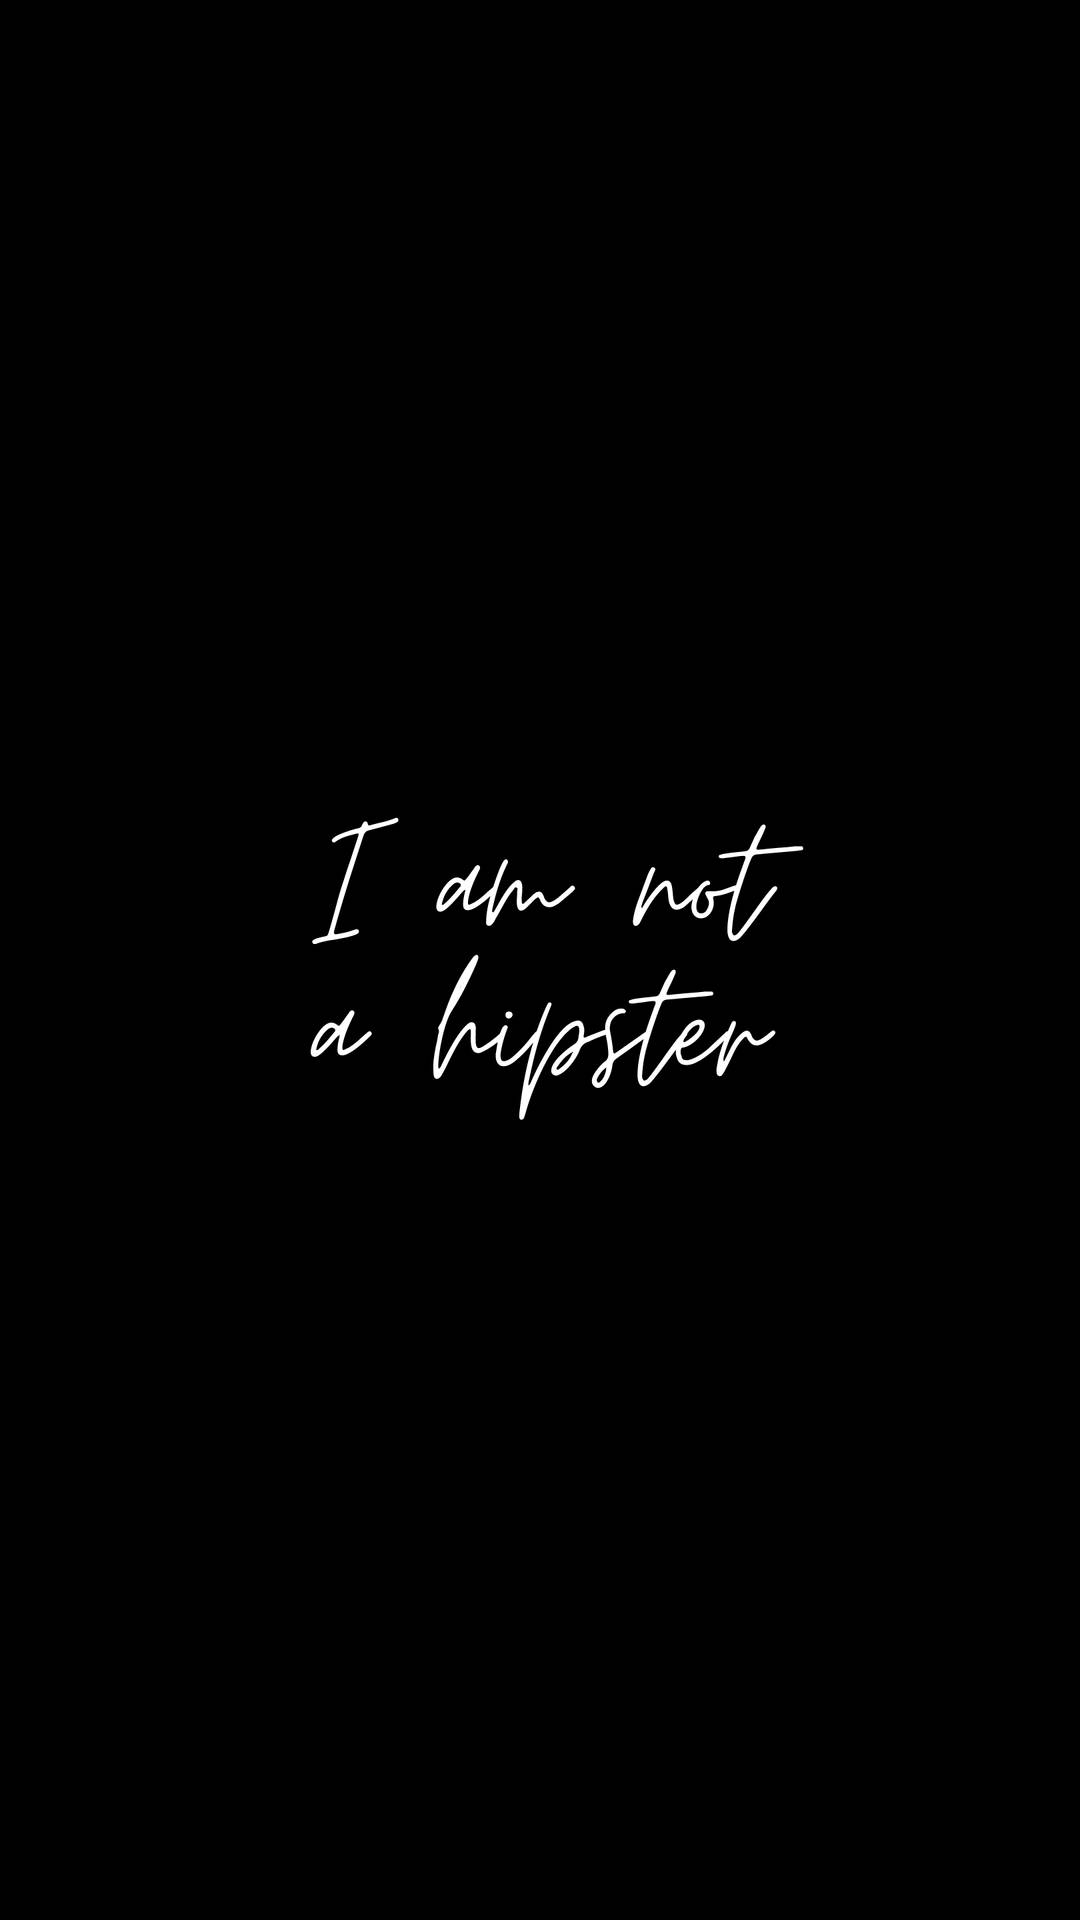 I Am Not A Hipster